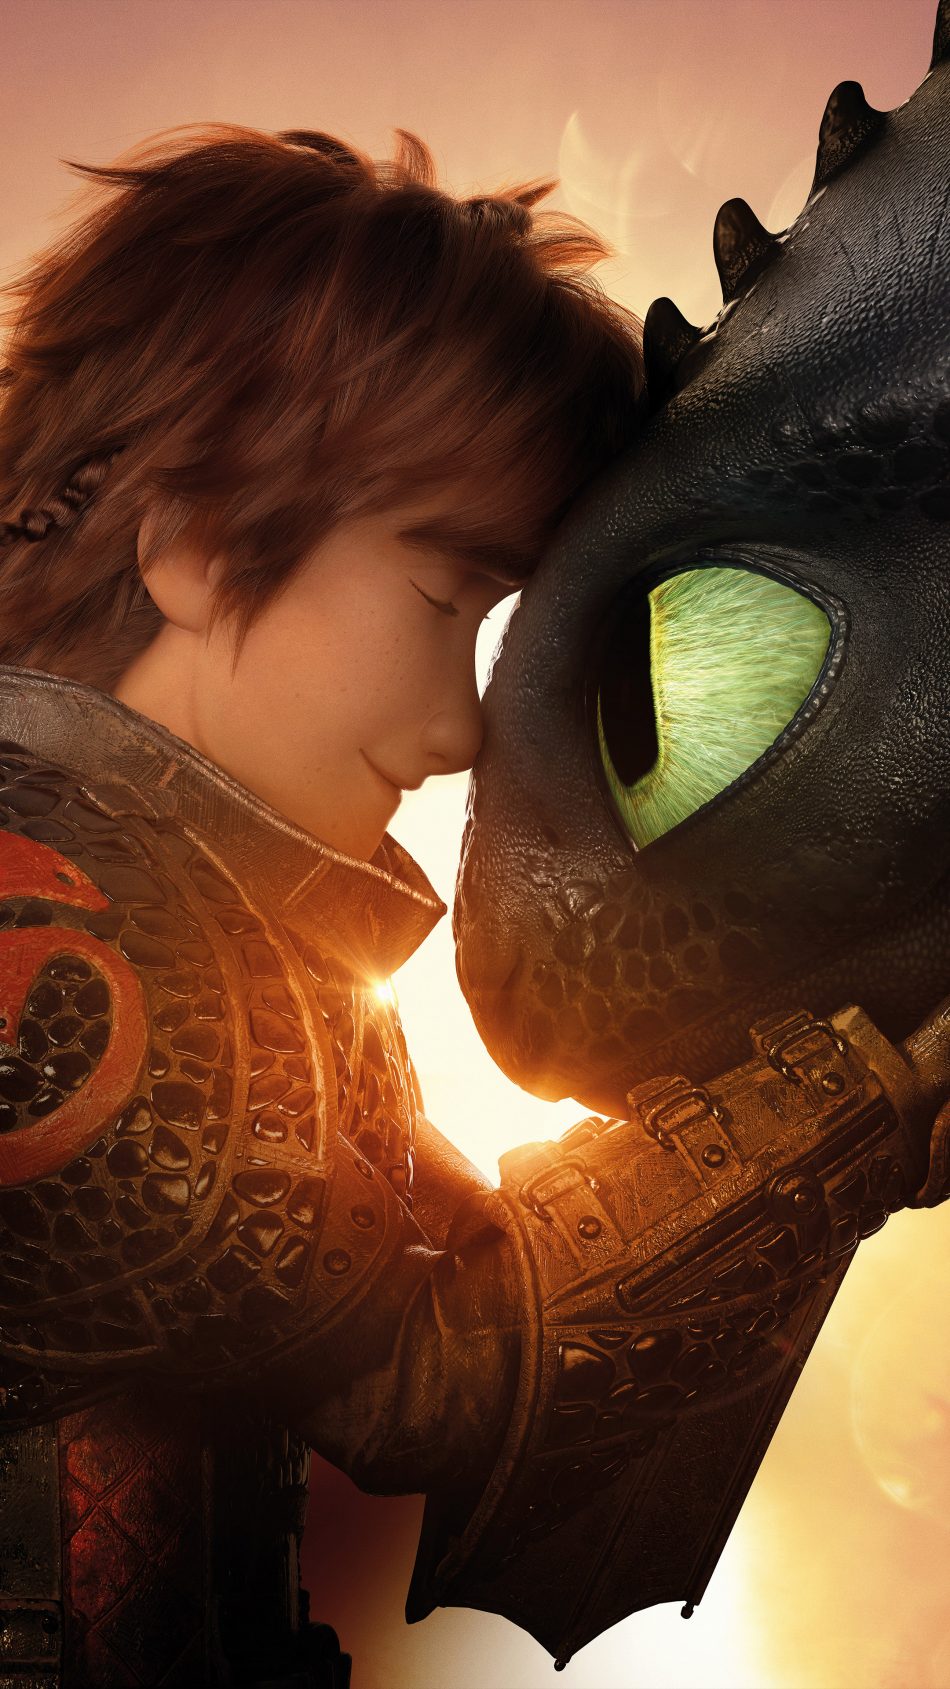 Hiccup Night Fury Toothless How To Train Your Dragon 3 4K Ultra HD Mobile Wallpaper